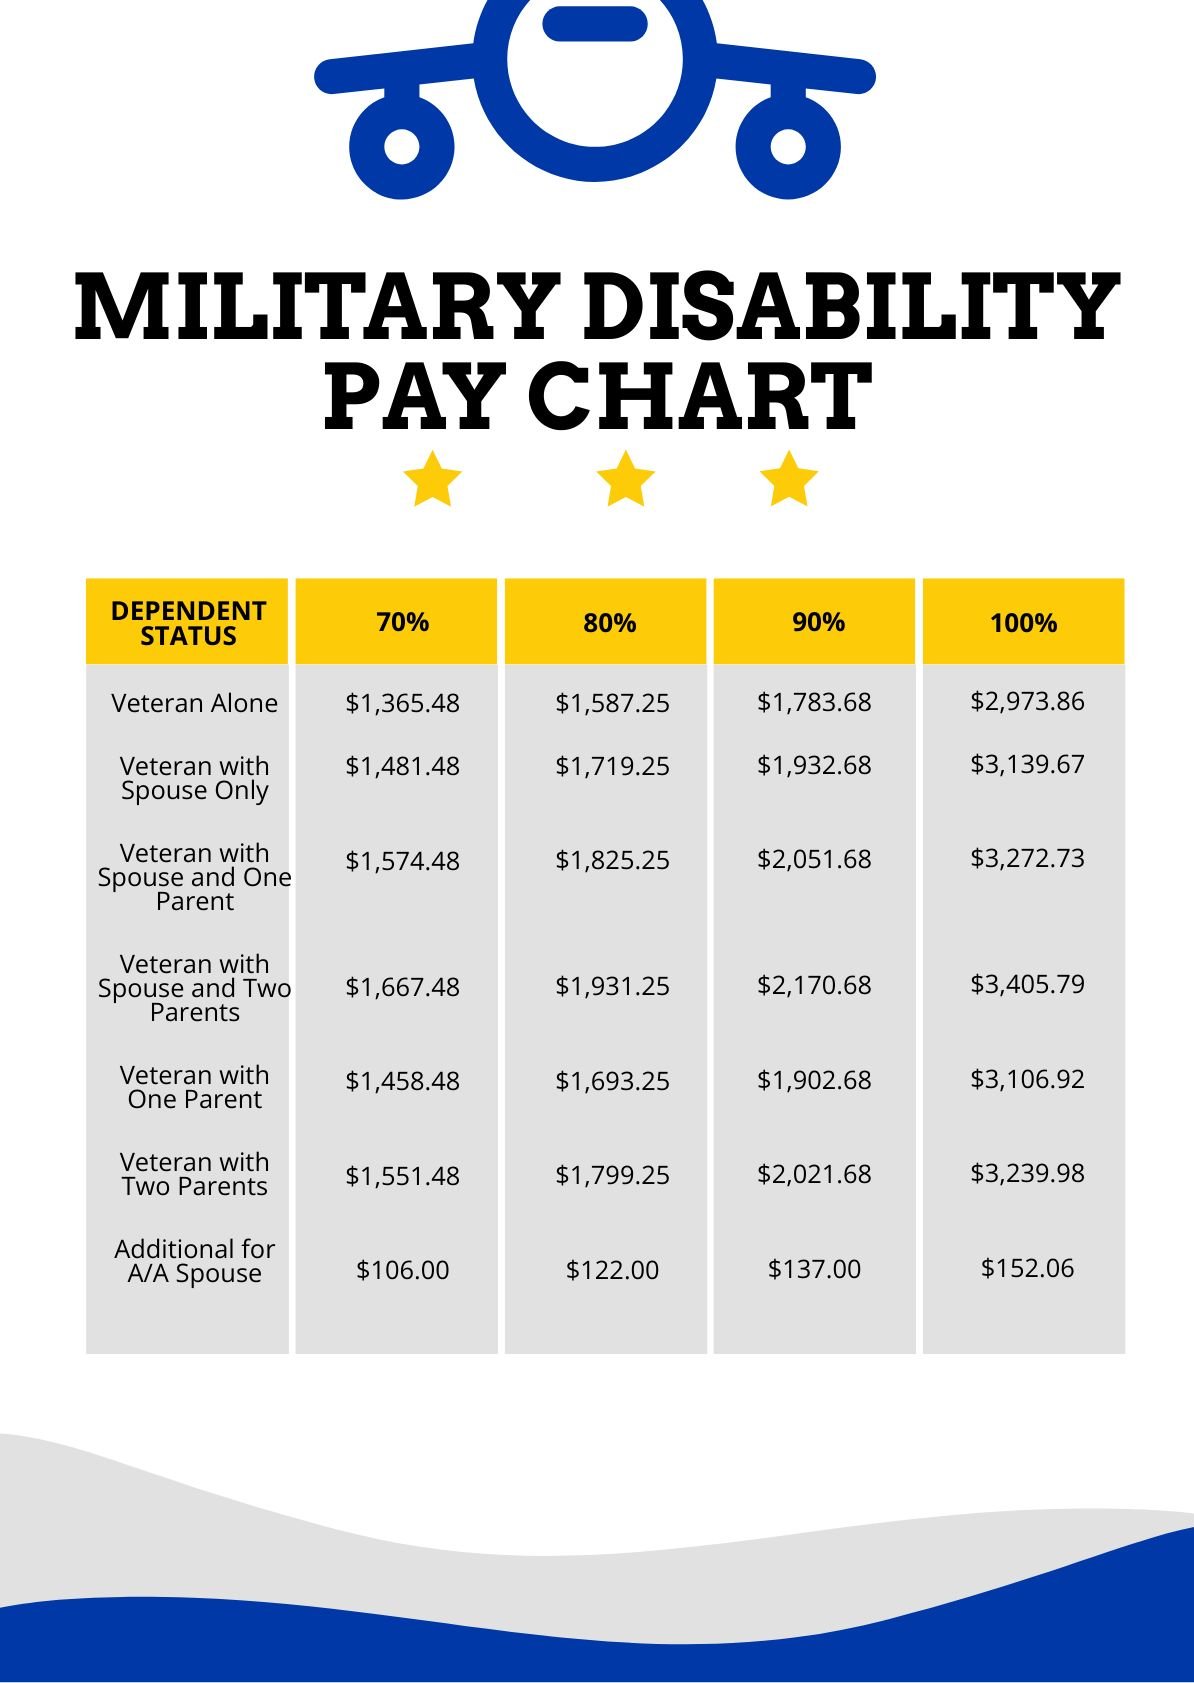 Military Disability Pay Chart in PDF Download